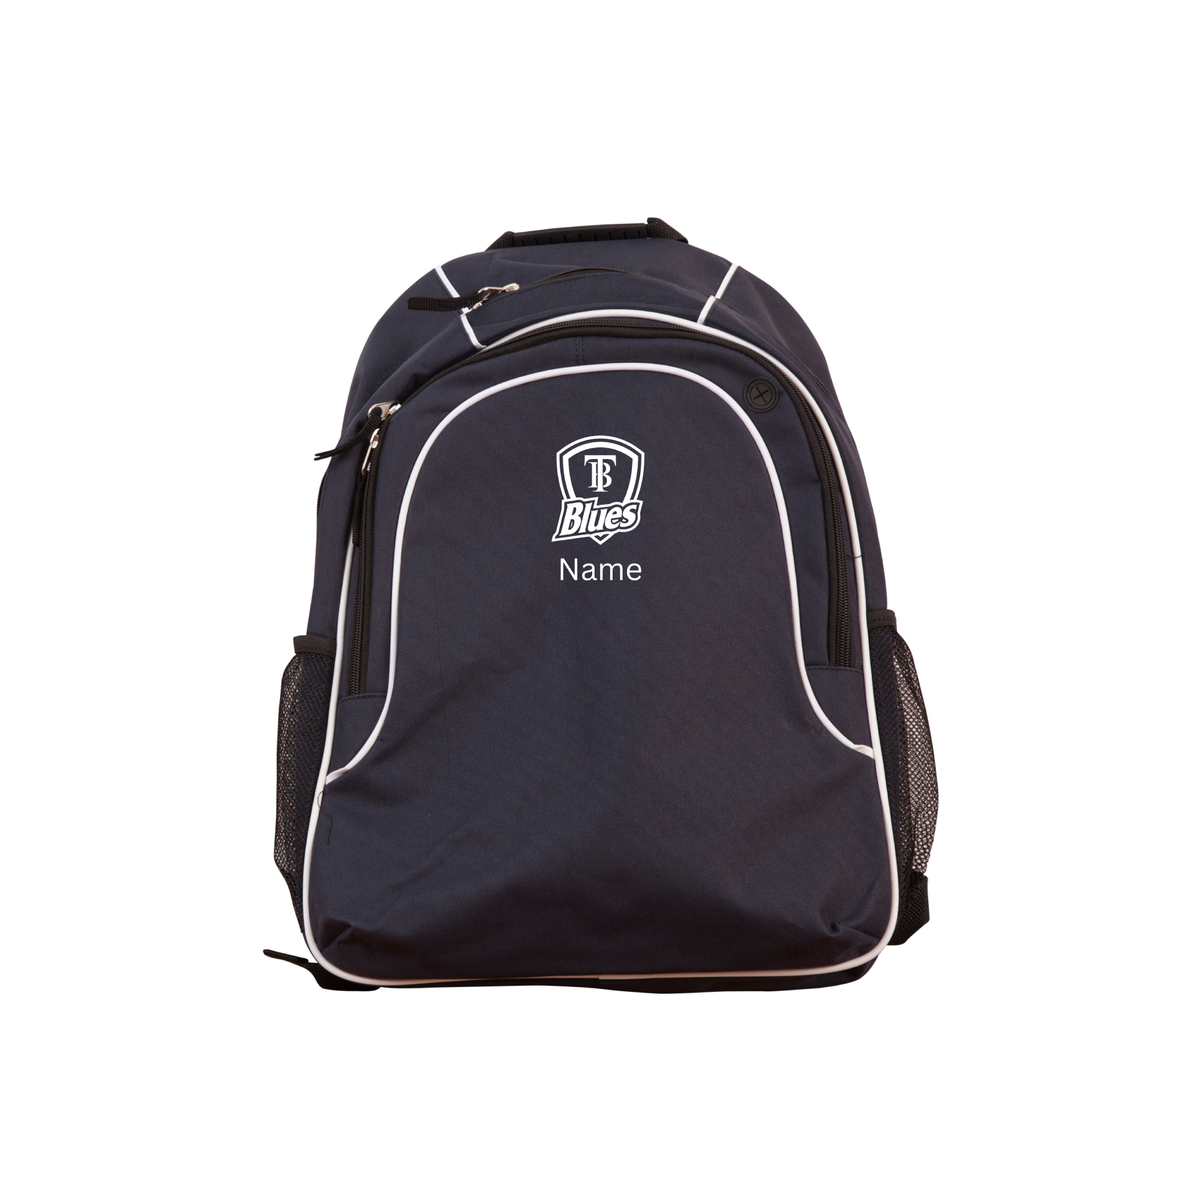 Tumby Bay Blues Winning Spirit Travel Navy Backpack Embroidered Logo + Personalised Embroidered Name-Collins Clothing Co